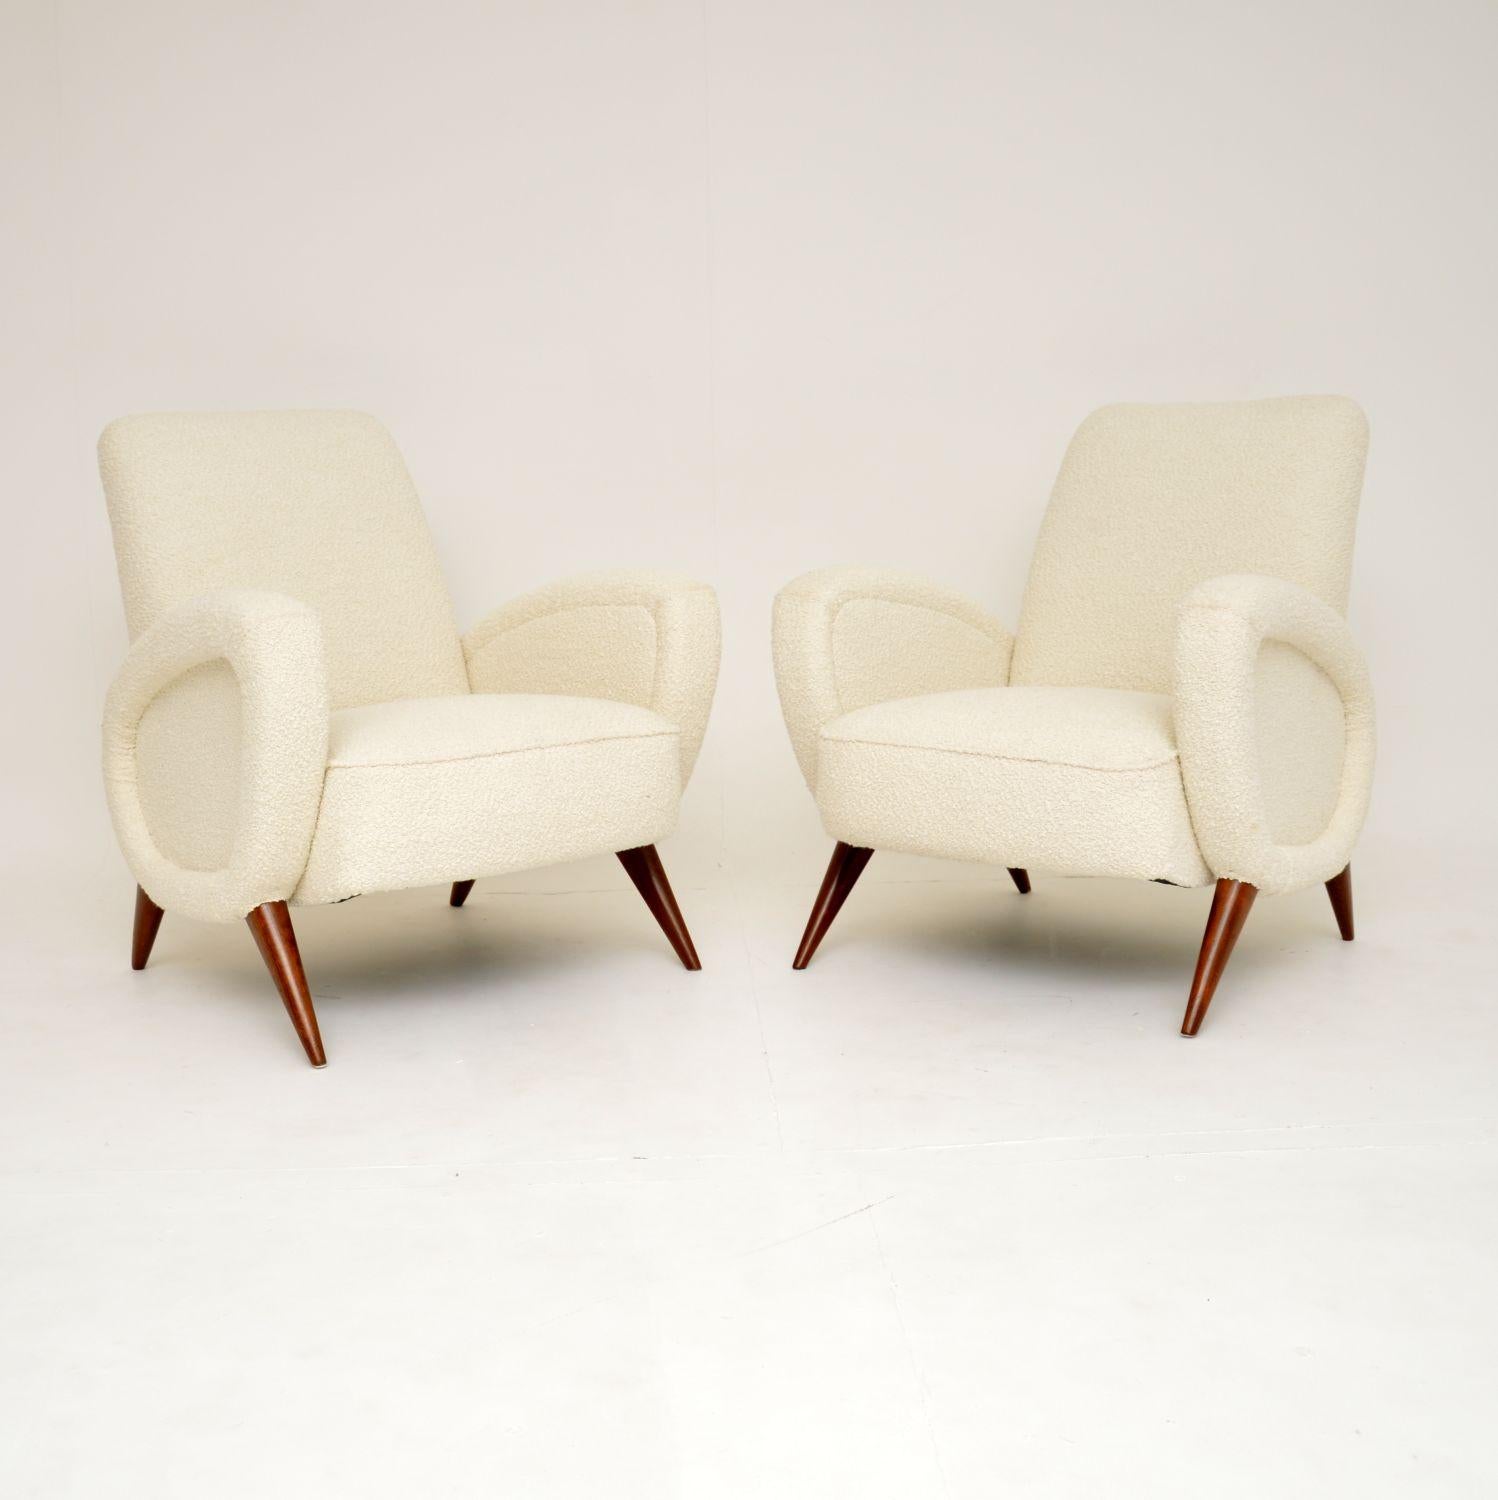 An absolutely stunning pair of original vintage Italian armchairs. These are of exceptional quality, they date from the 1960’s.

These are most likely an early and rare design by Marco Zanuso. They are extremely well made, the frames are very